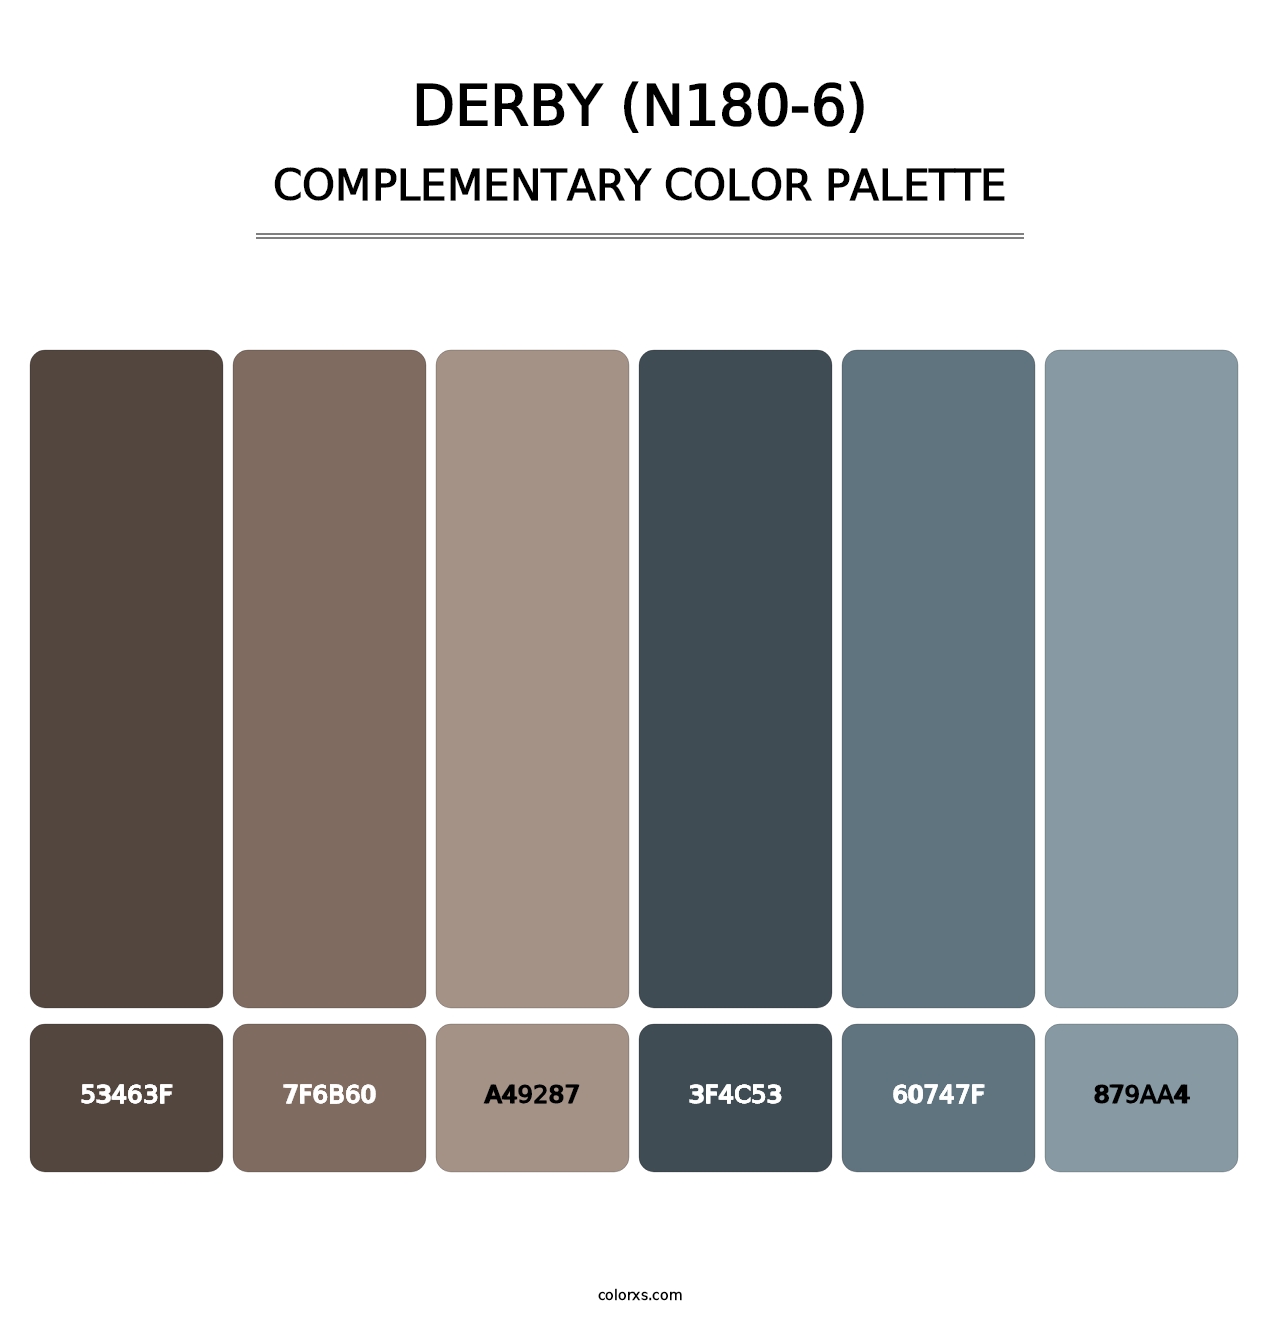 Derby (N180-6) - Complementary Color Palette